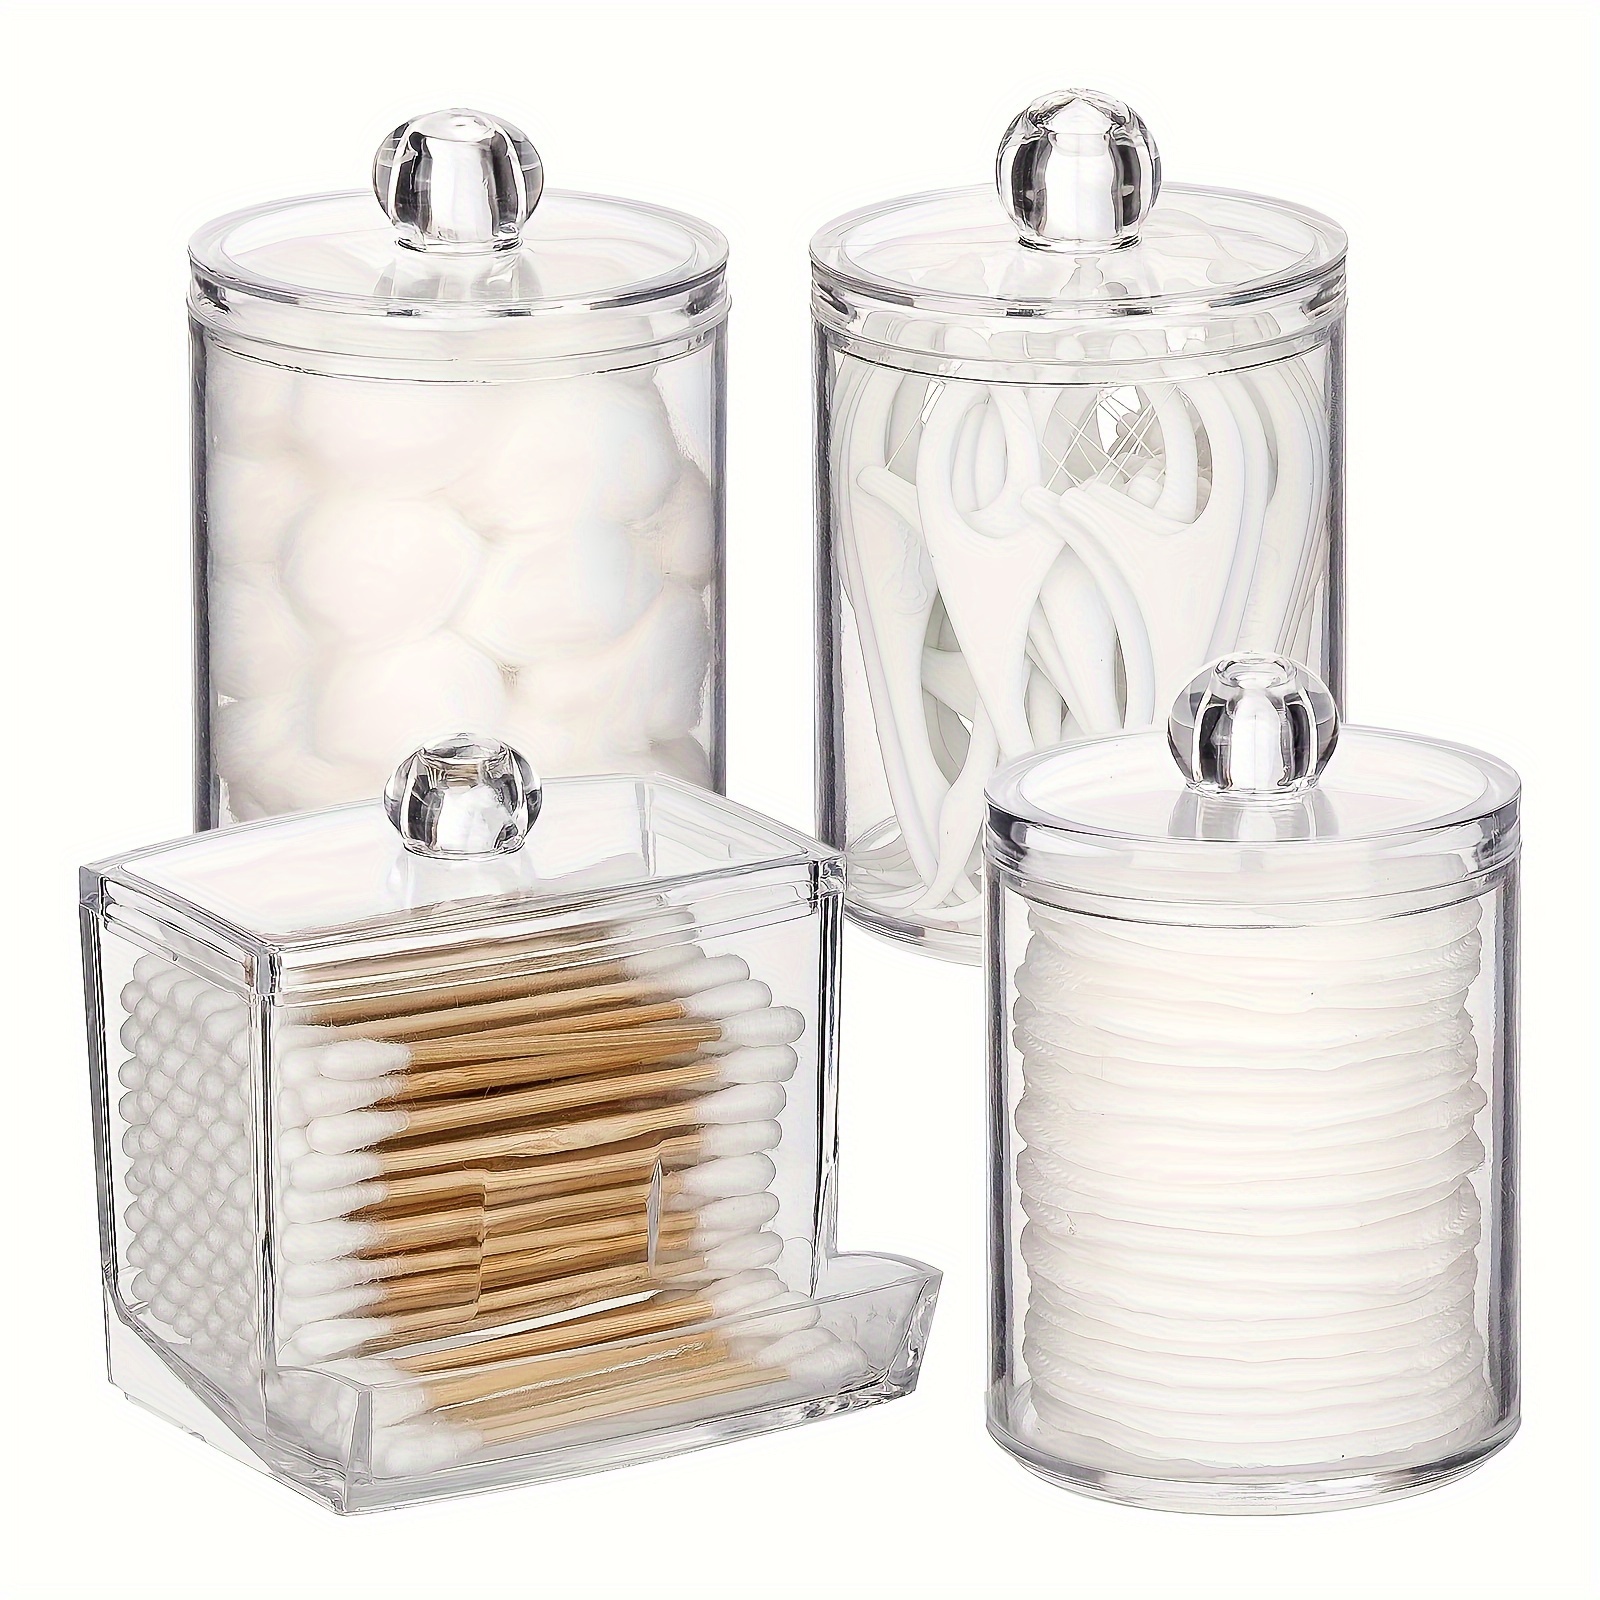 

1/4-piece Clear Plastic Storage Jars - Stylish Bathroom Organizer For Cotton Swabs, Balls & Makeup Tools - Sealed 7/10 Oz Containers With Flip Lid